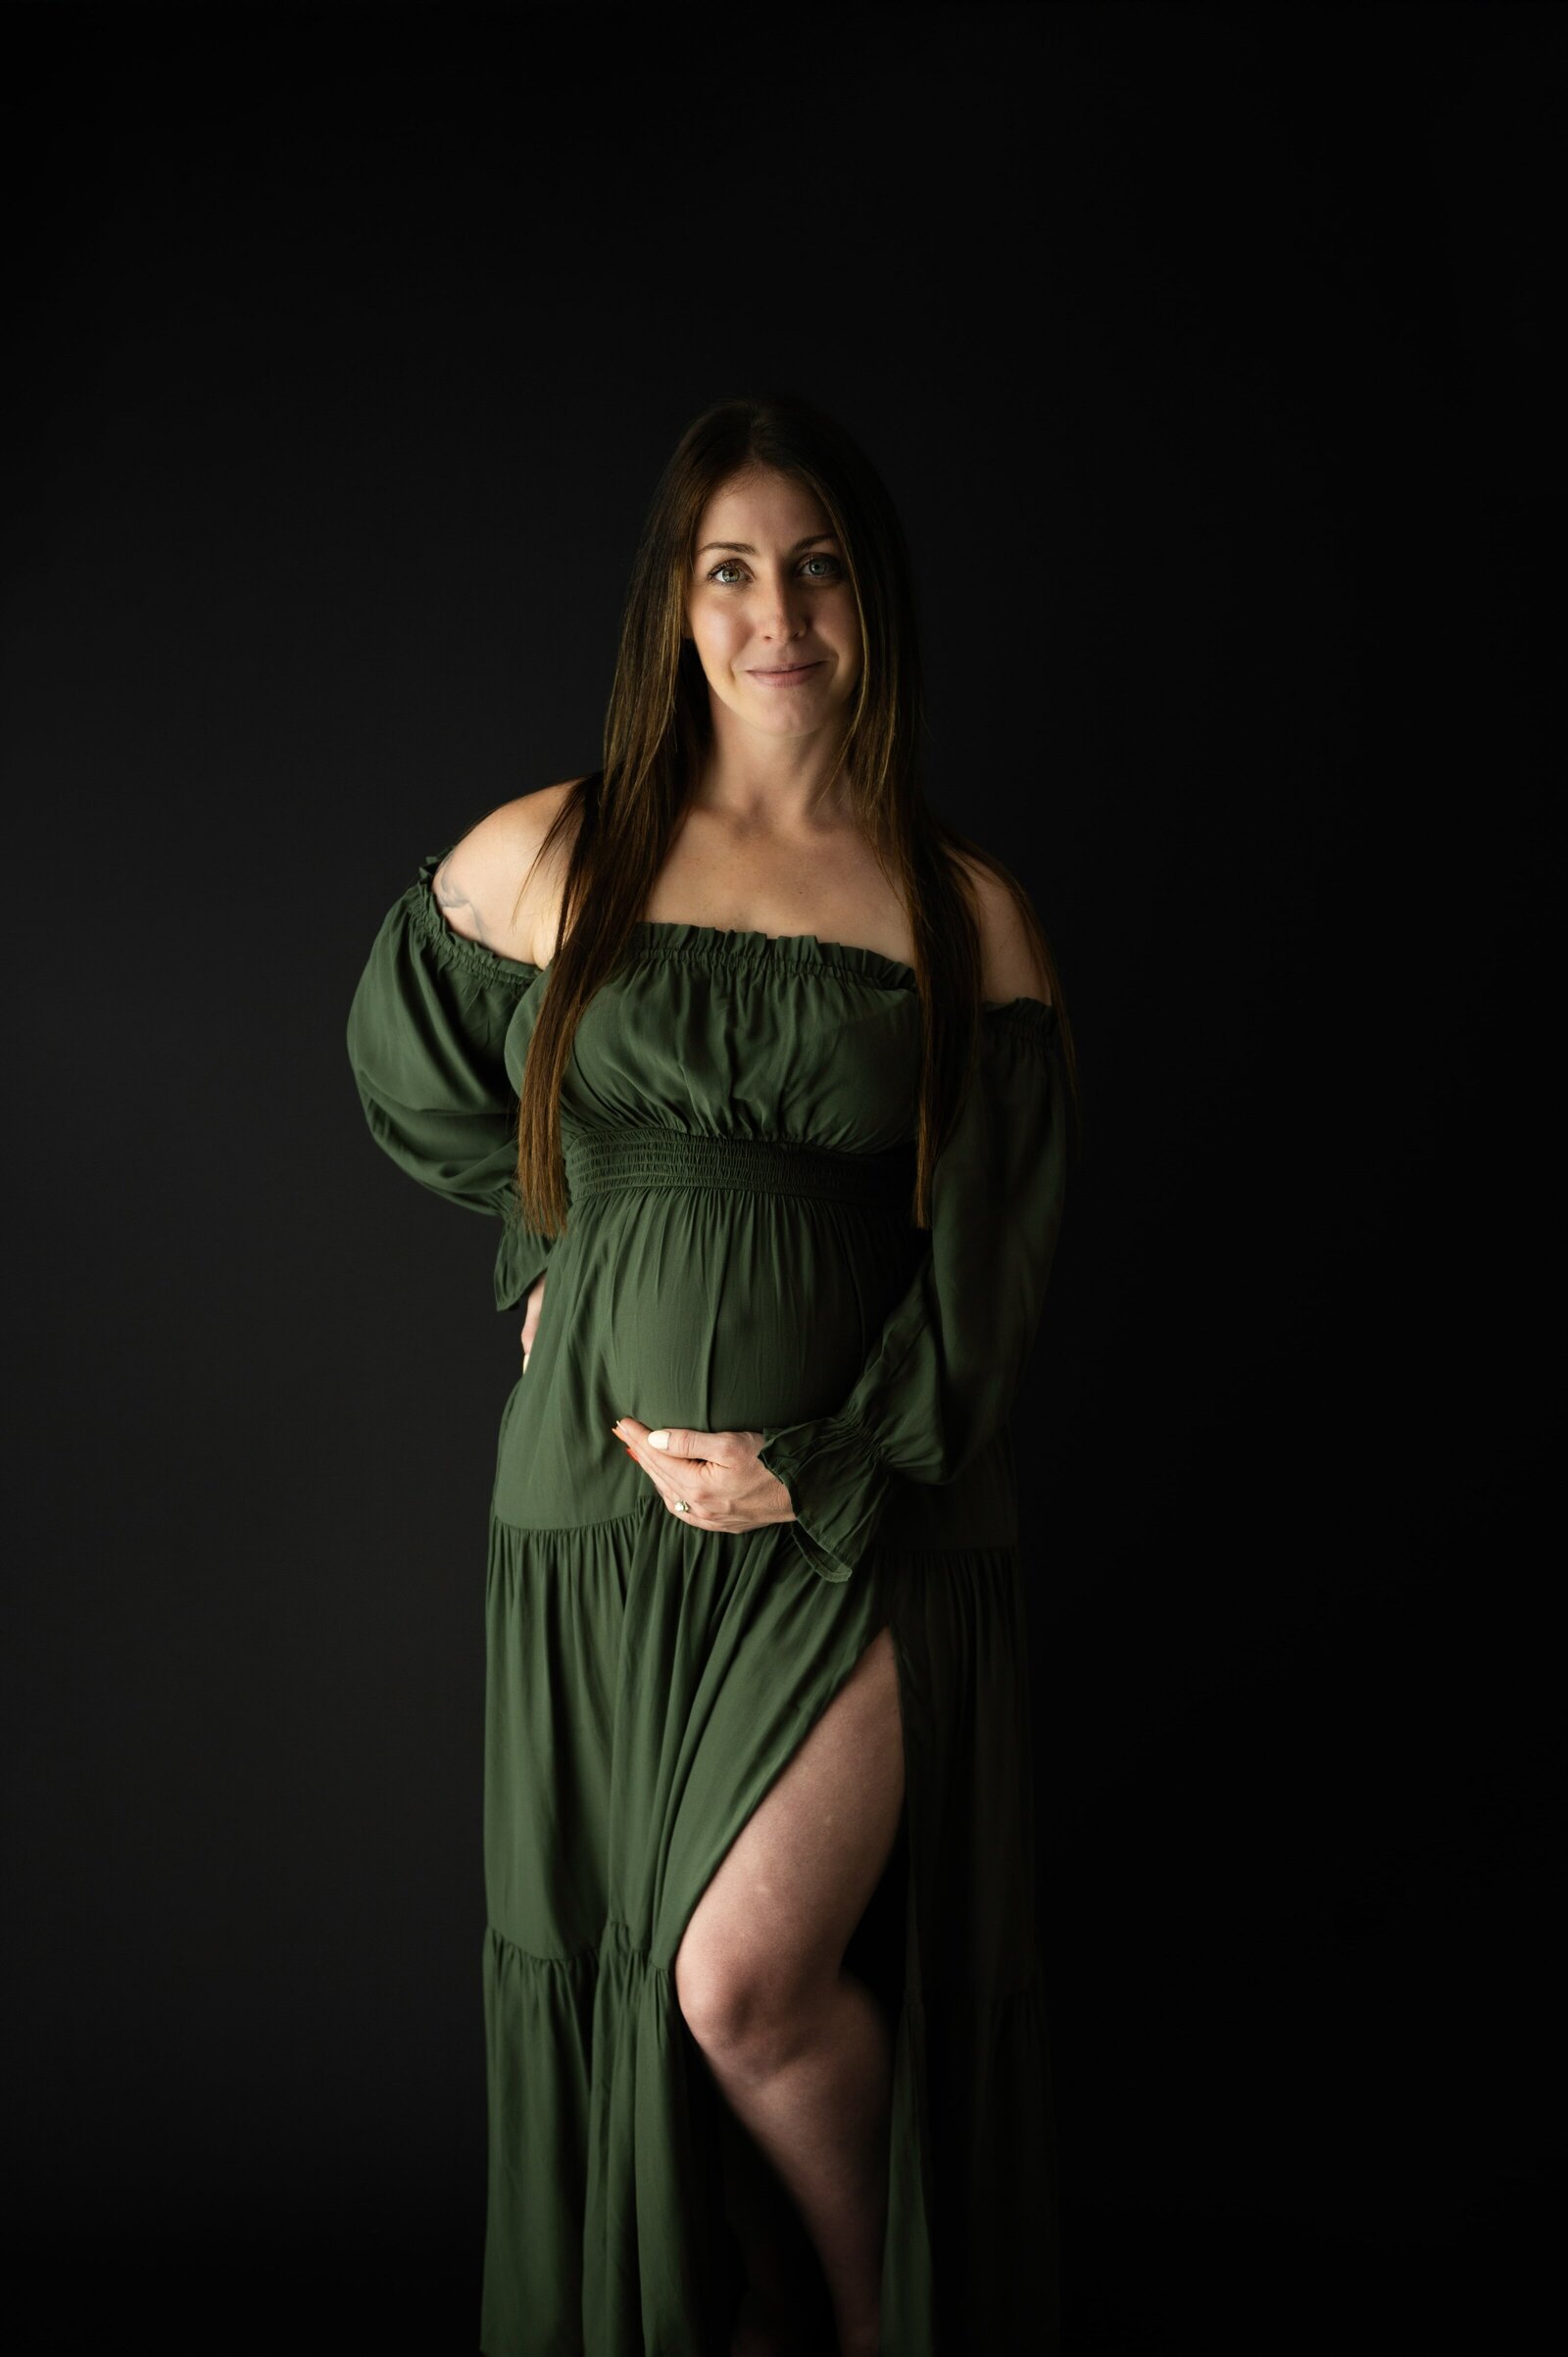 pregnant woman holding her stomach with on leg showing through green dress